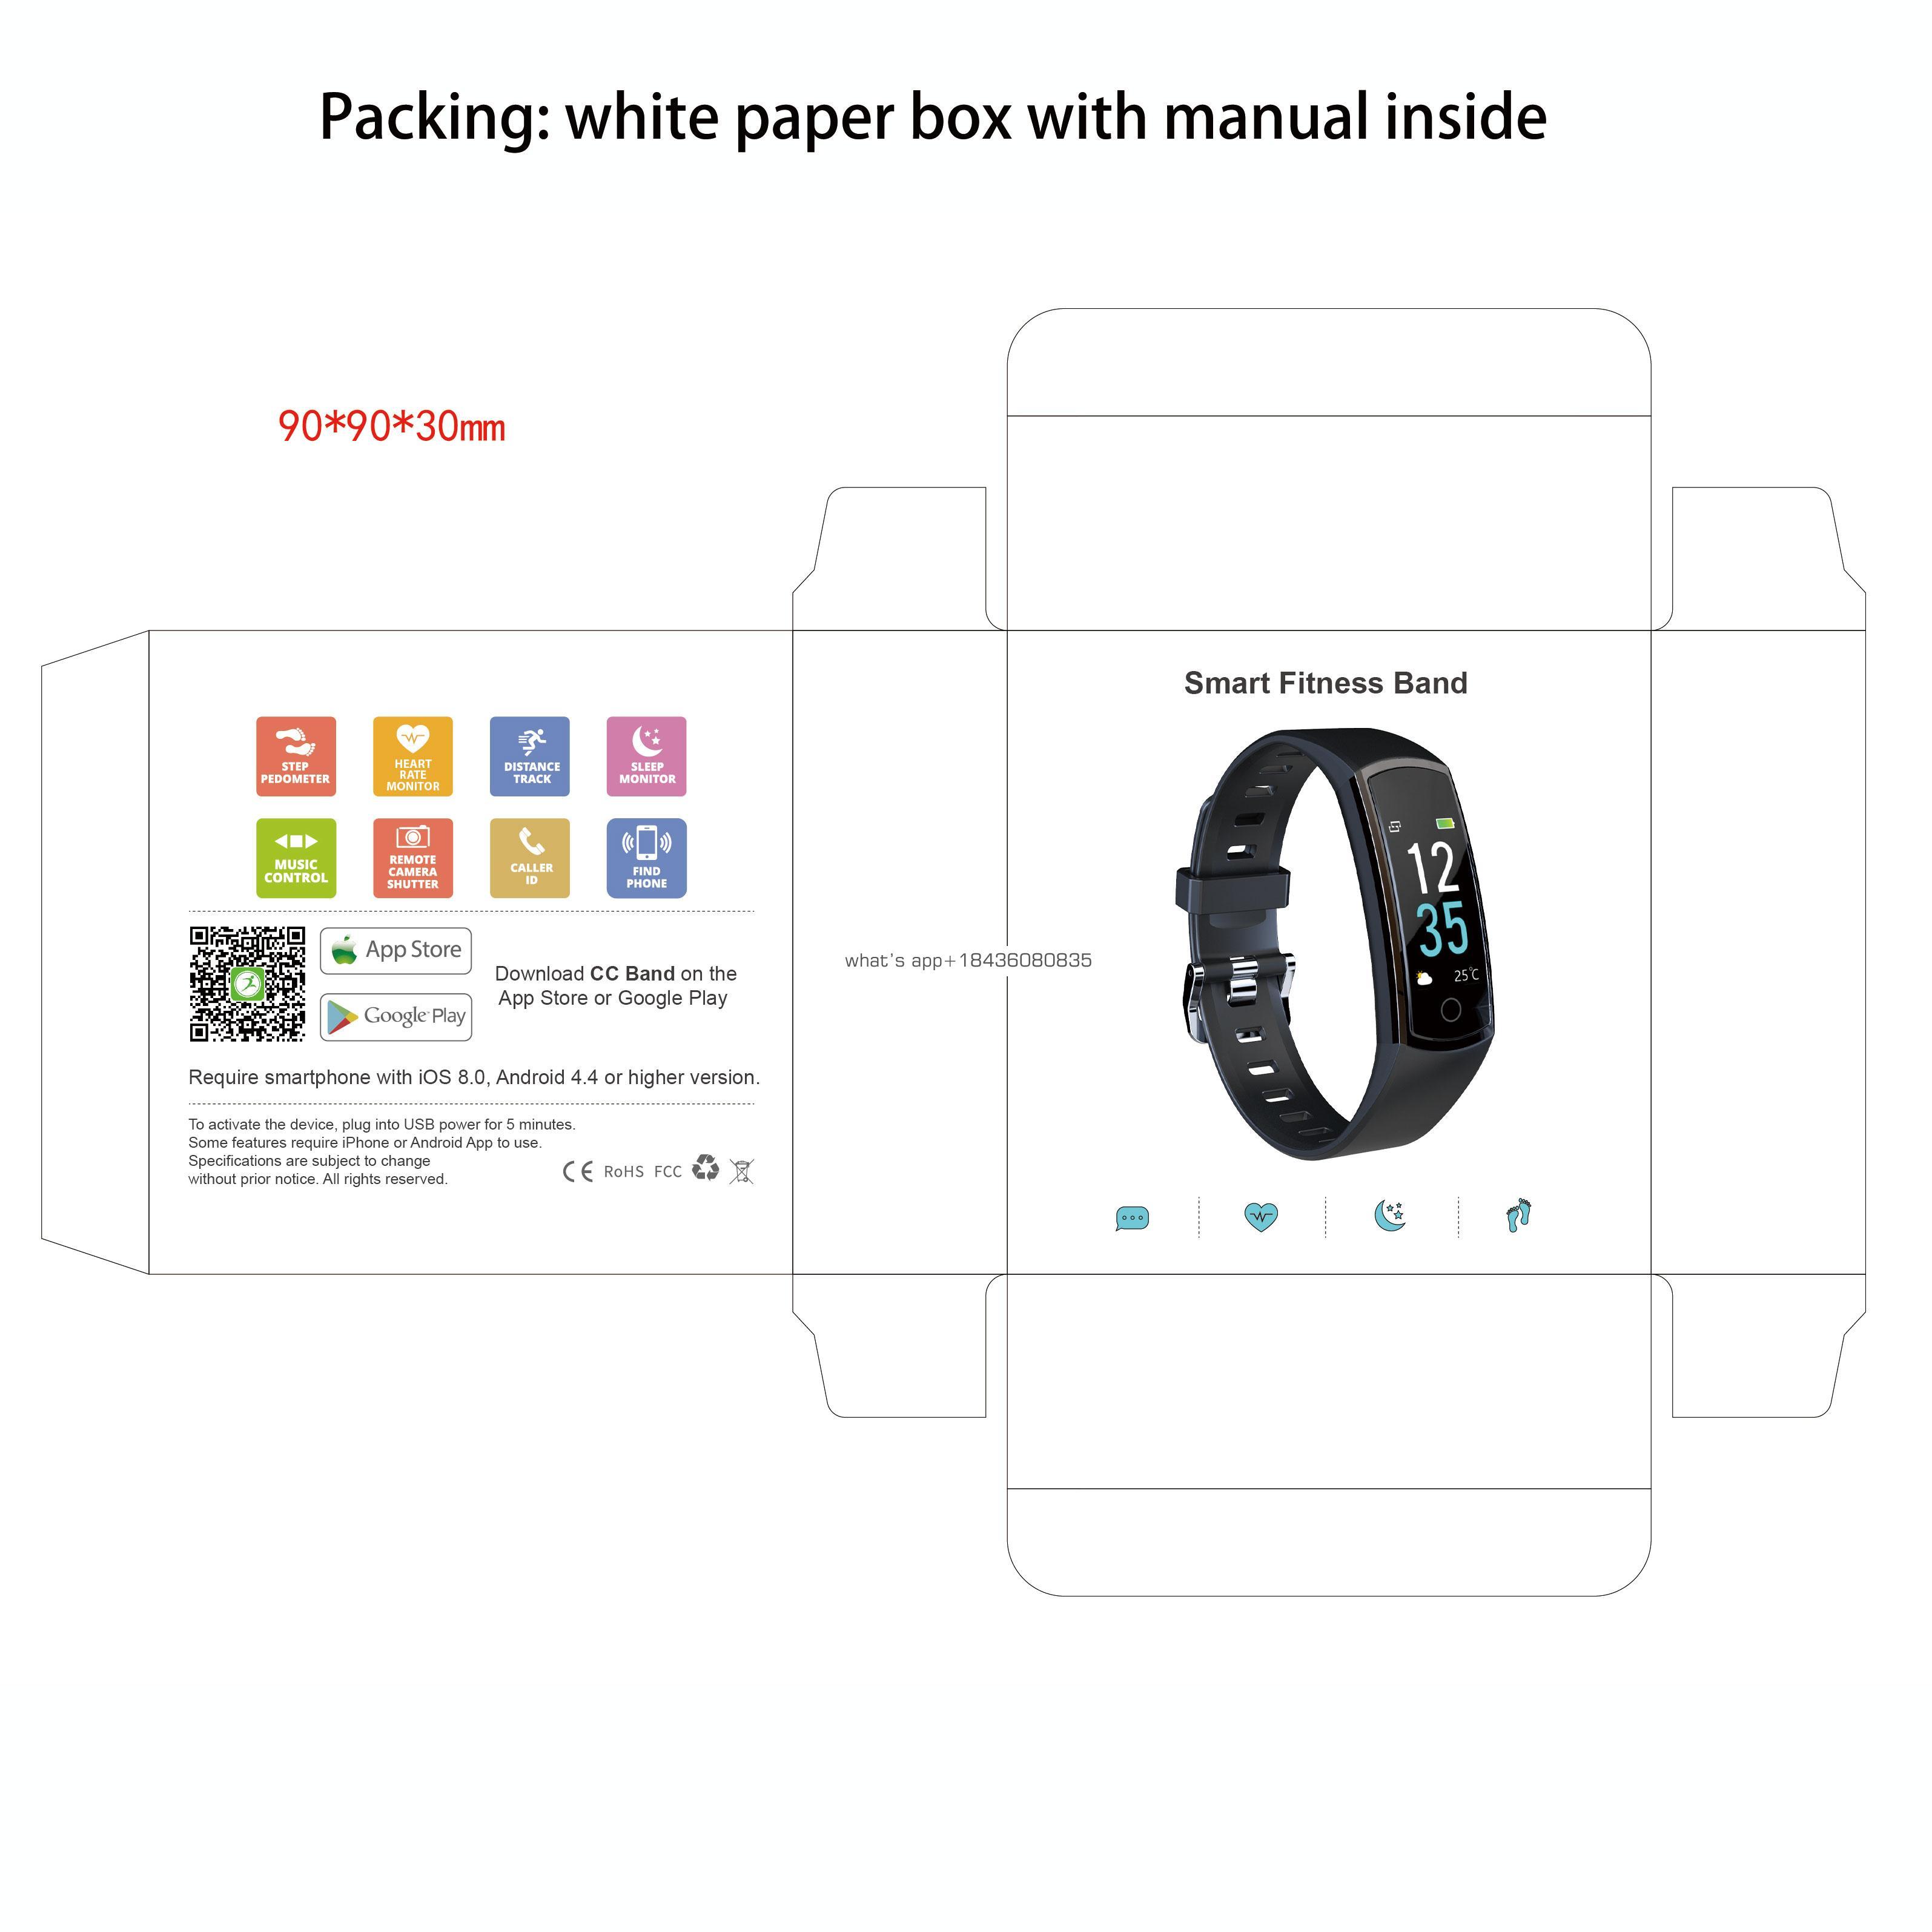 New design android waterproof 30m heart rate blood pressure large screen smart watch long standby usb charge for excise